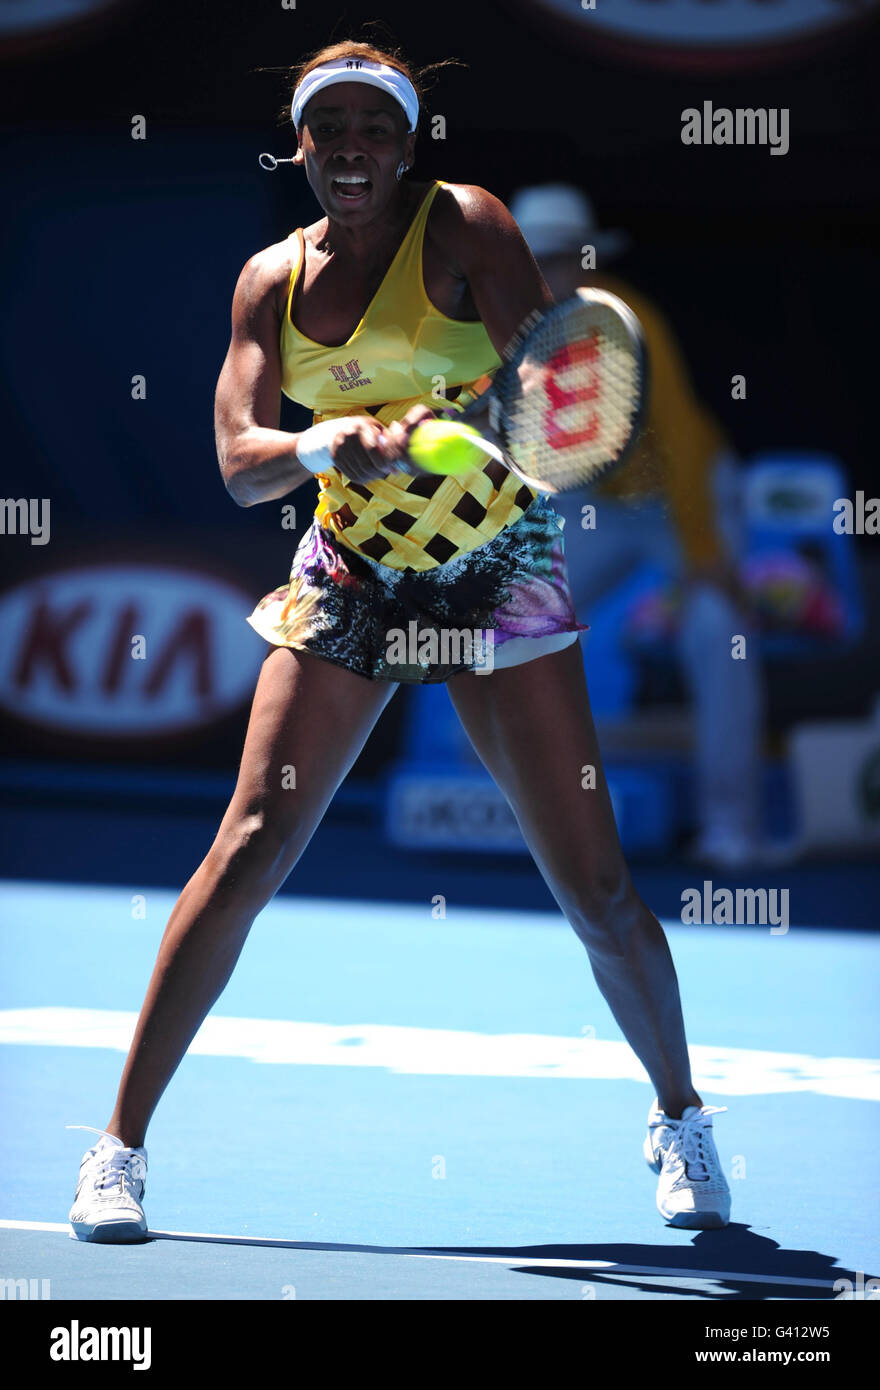 USA's Venus Williams in action against Czech Republic's Sandra Zahlavova during day three of the 2011 Australian Open at Melbourne Park in Melbourne, Australia. Stock Photo